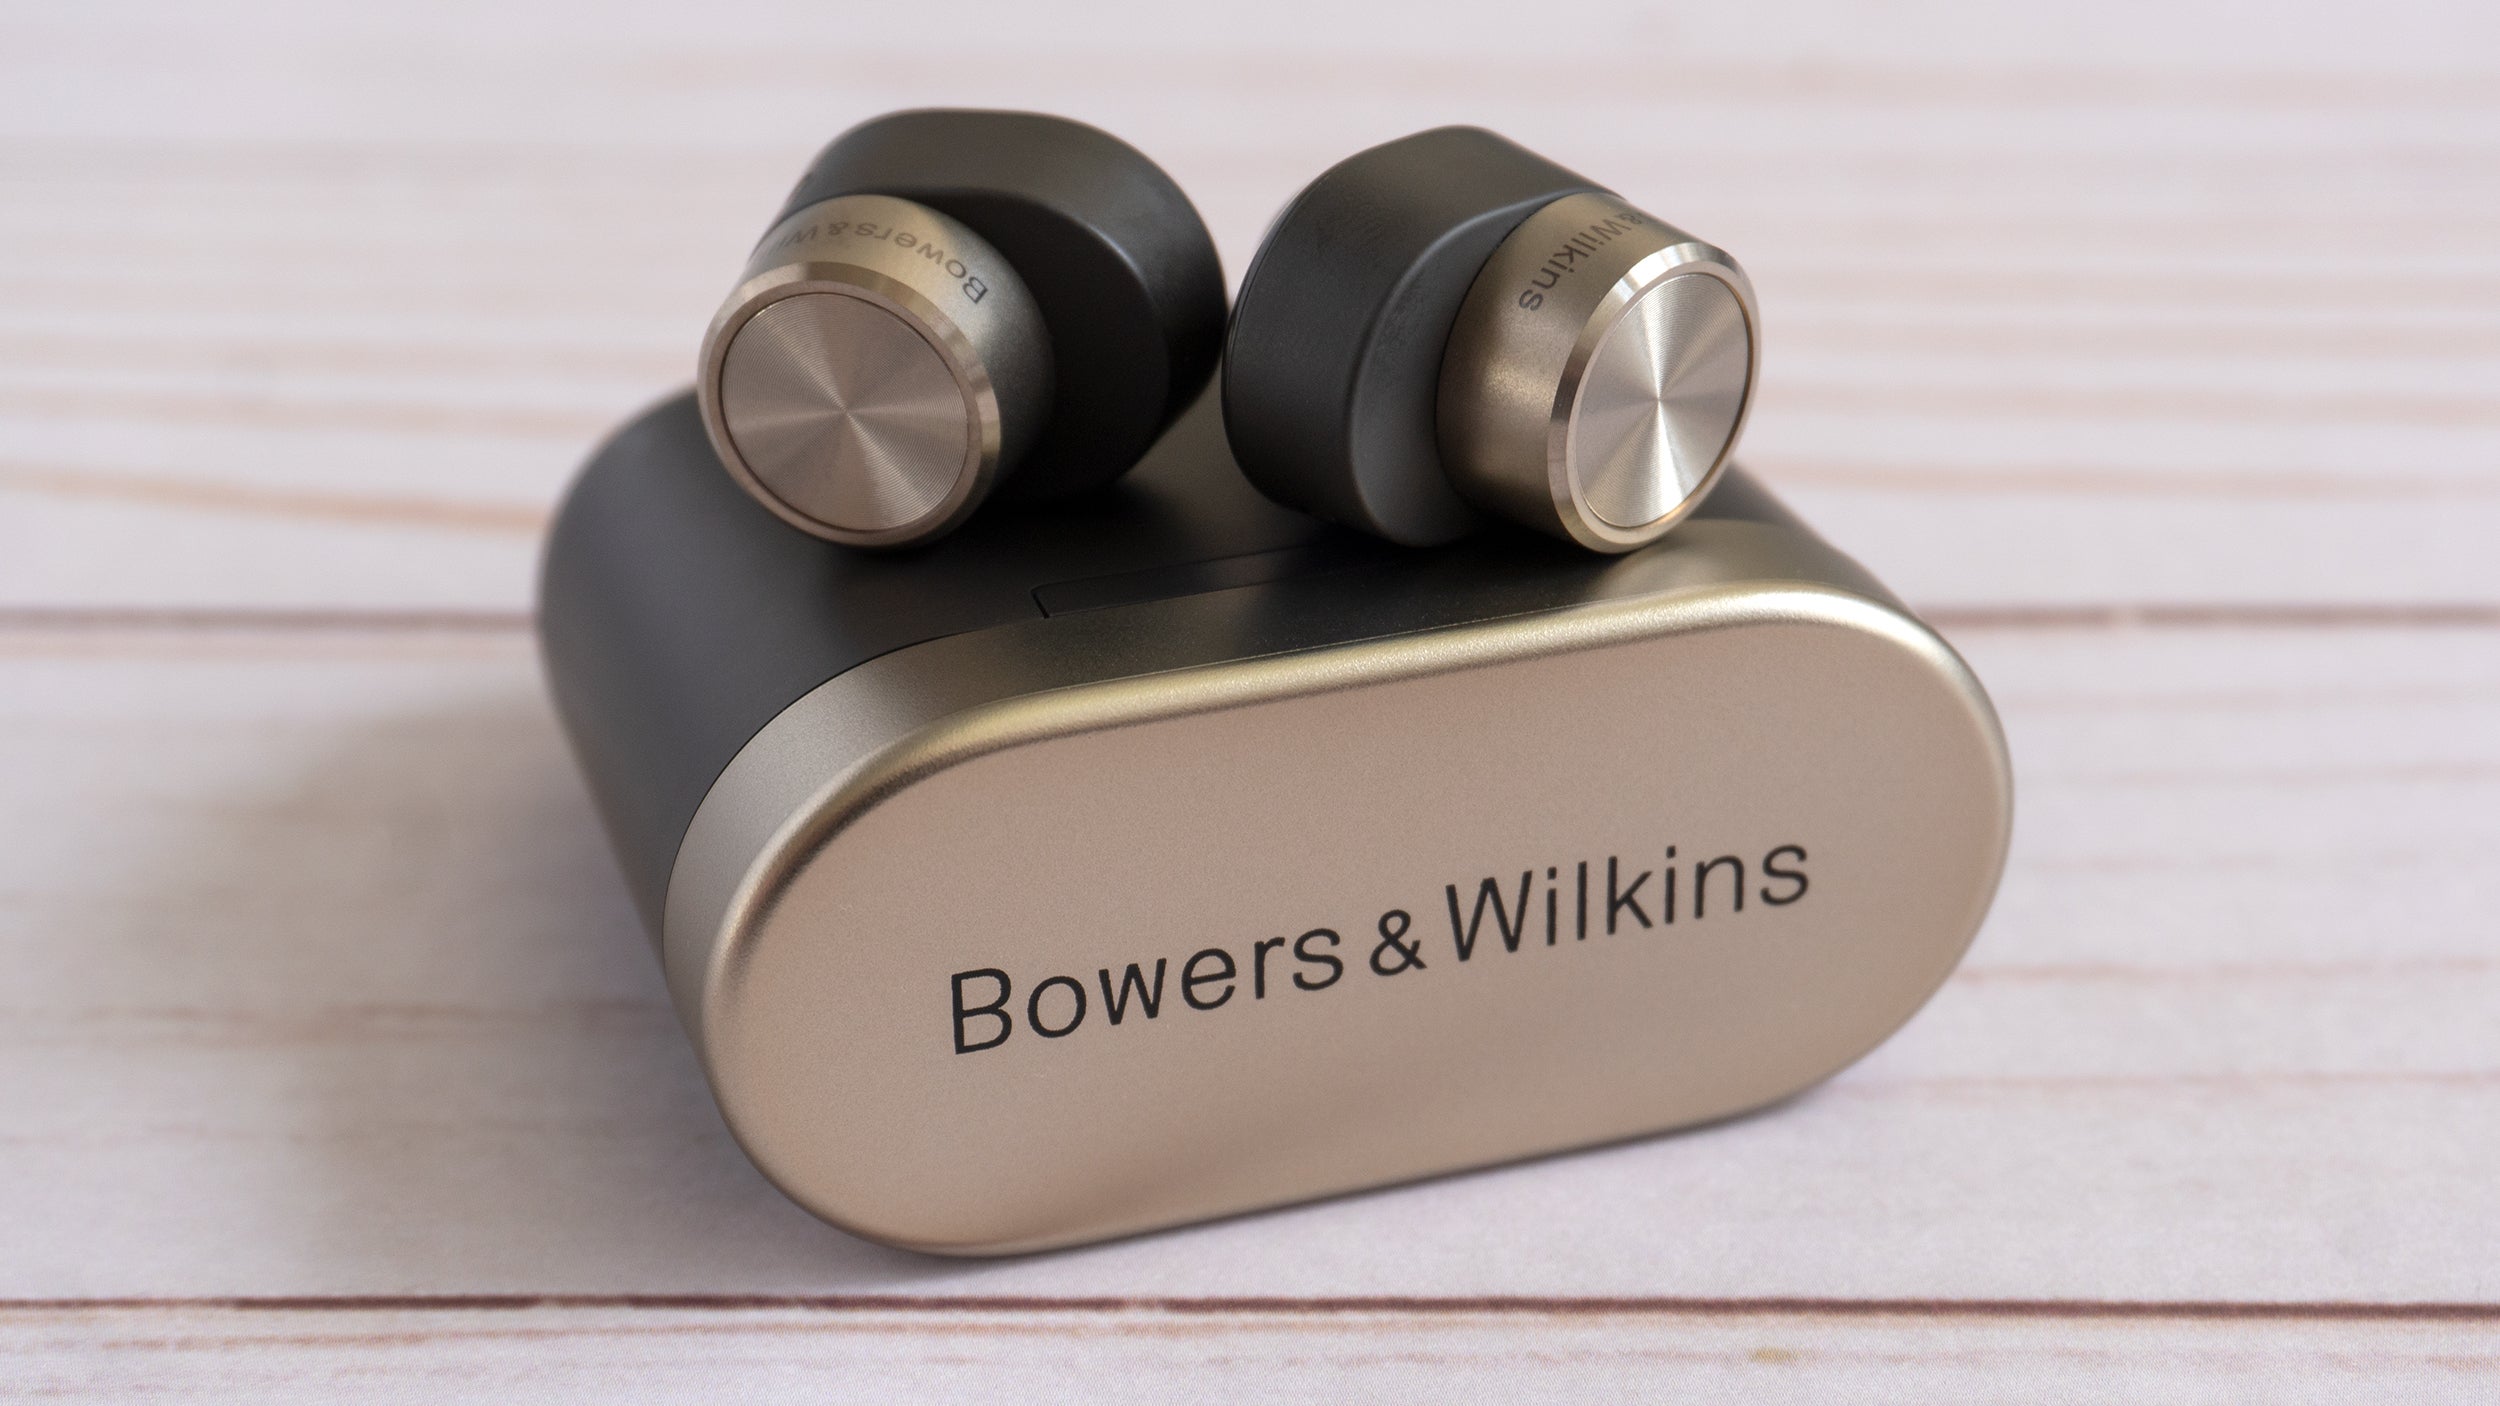 If I were headed to a wedding and wanted to look classy, the Bowers & Wilkins PI7s would be the wireless earbuds I'd reach for. (Oh, come on, NO ONE wants to listen to all those speeches at the reception.) (Photo: Andrew Liszewski/Gizmodo)